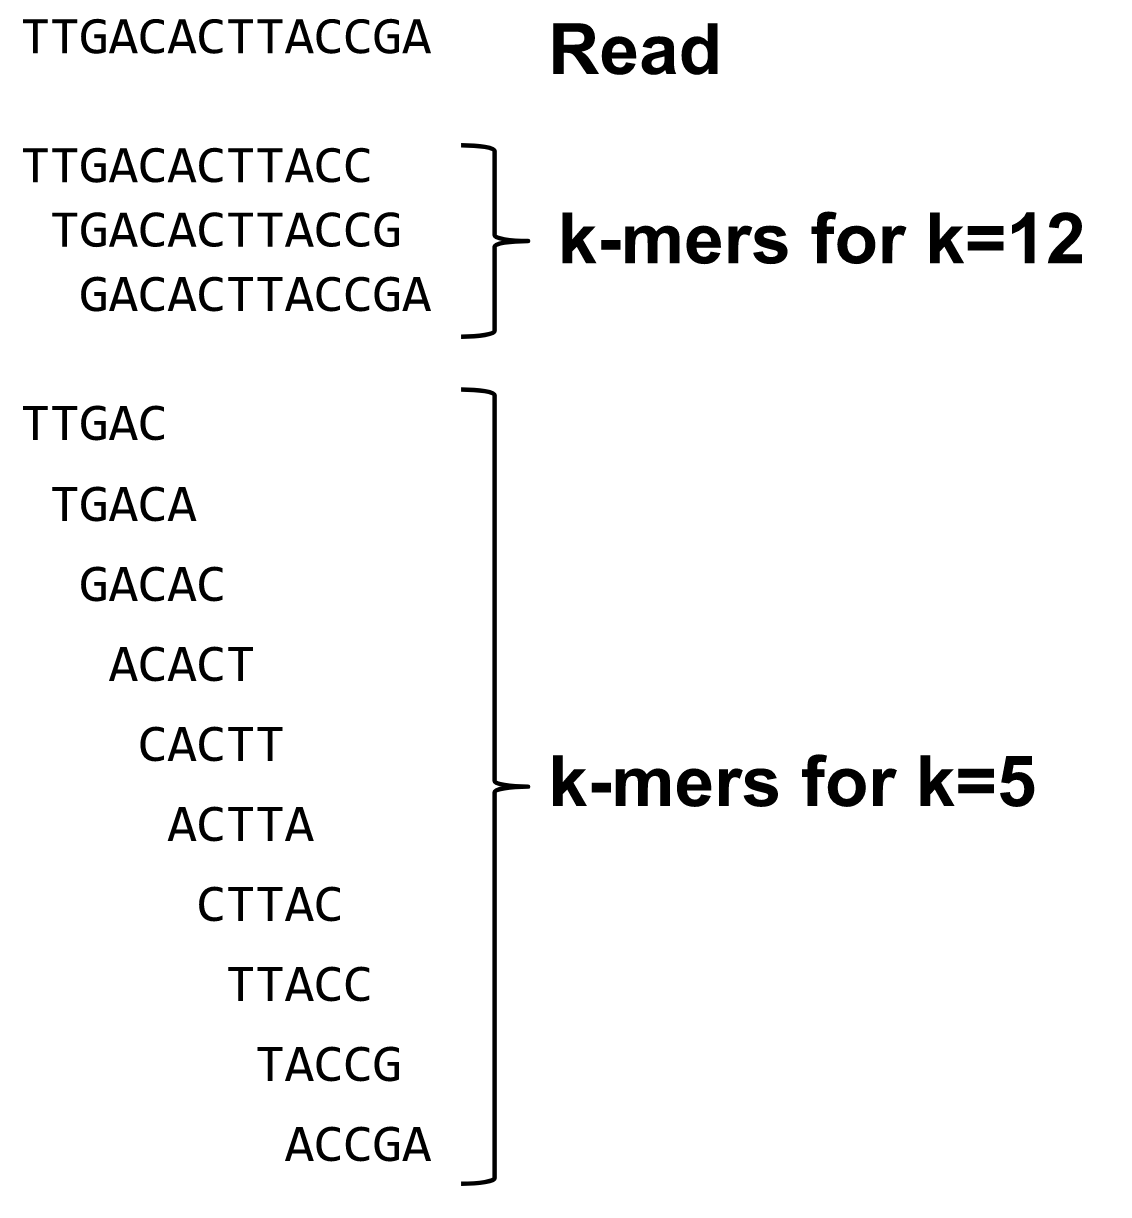 K-mers are subwords of length k of a string. 